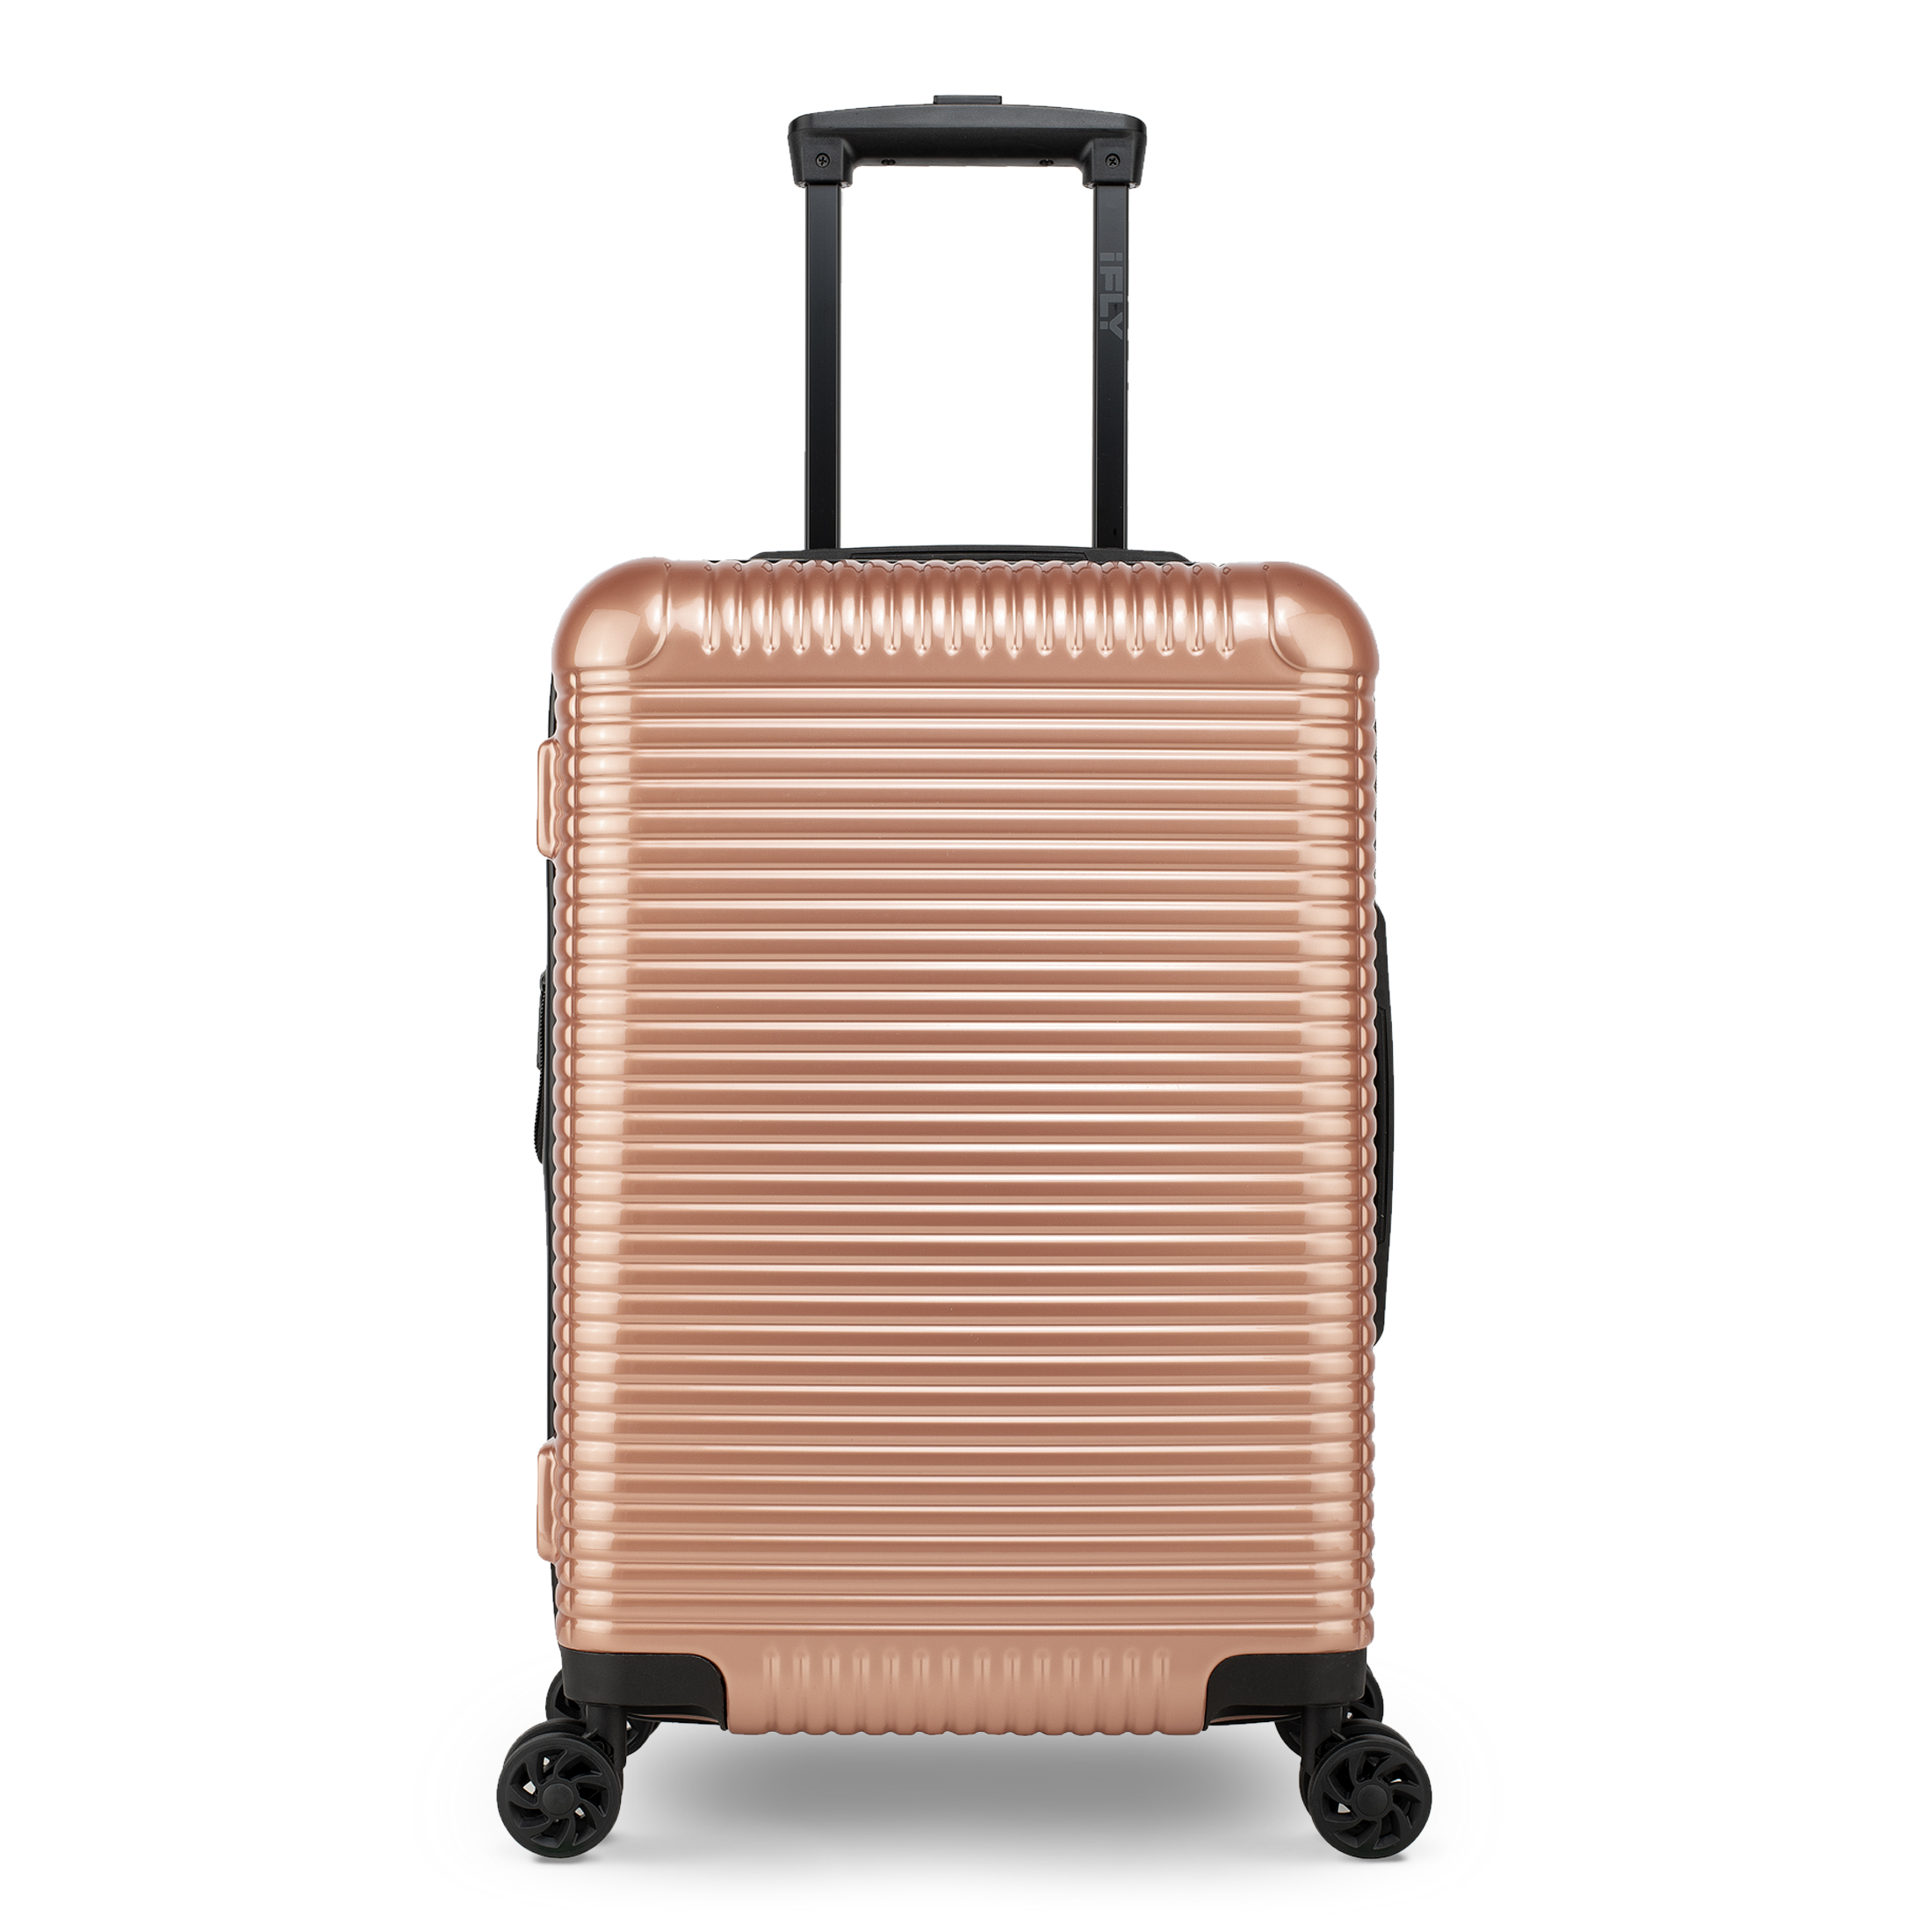 iFLY Hardside Alloy 20 Inch Carry-on, Copper - image 1 of 9